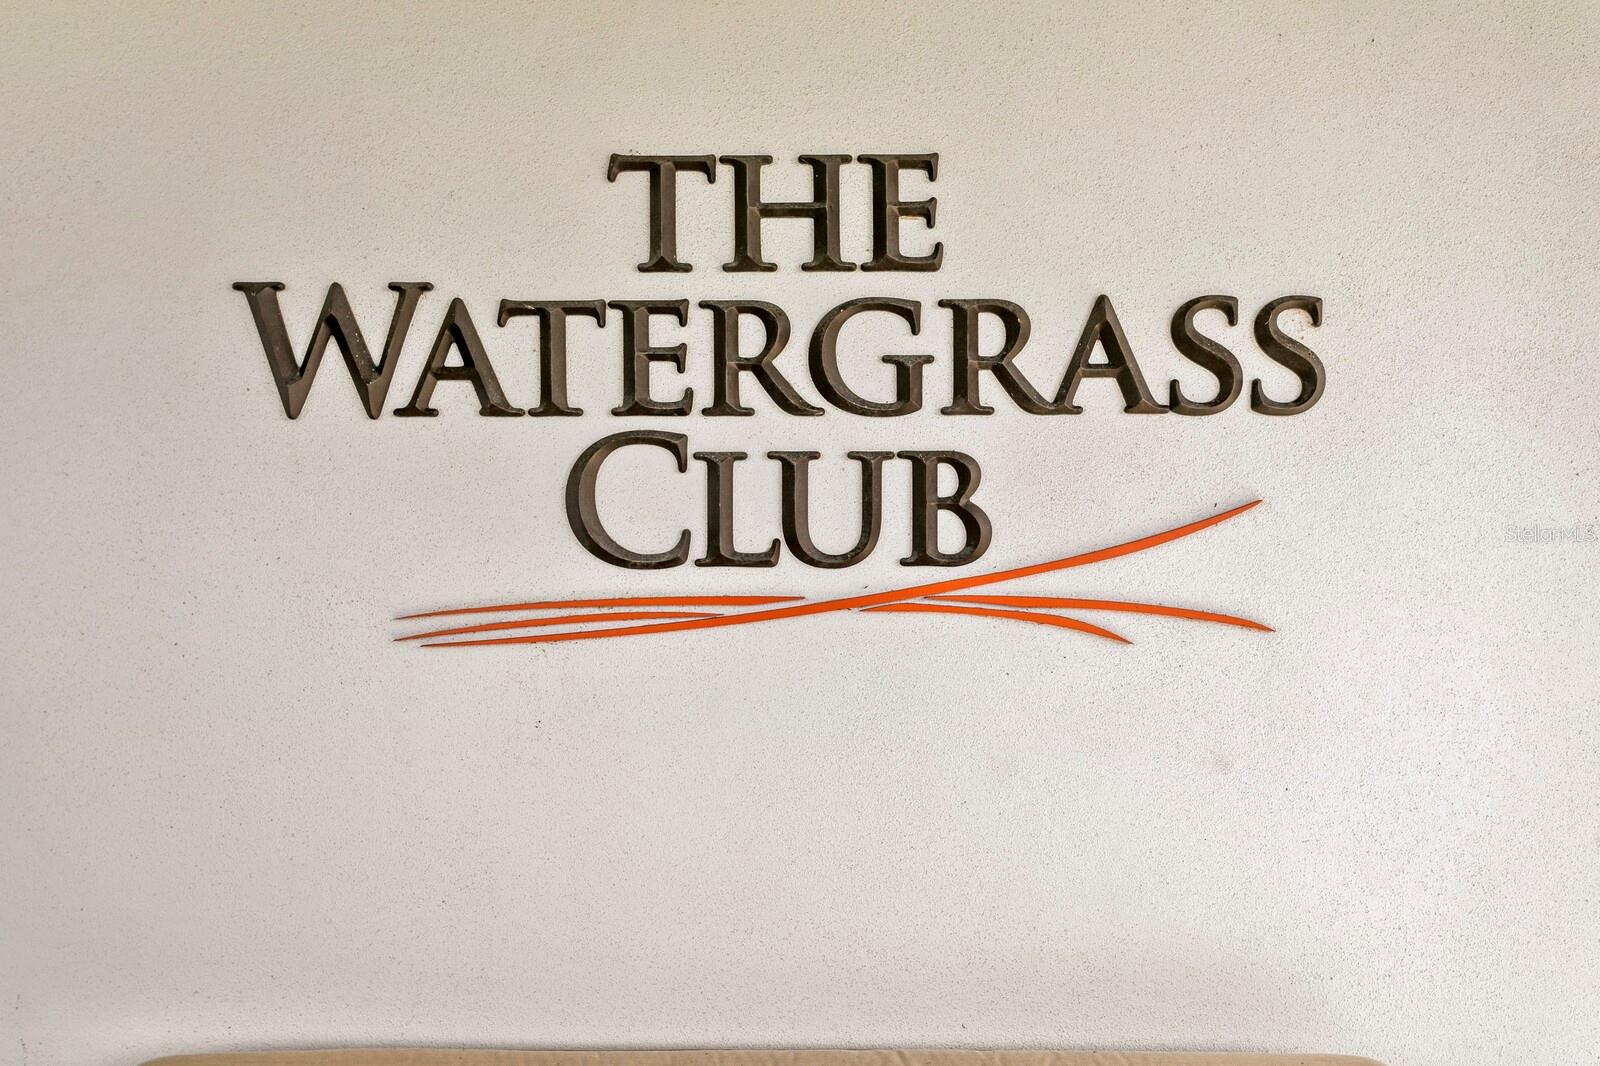 Welcome to the Watergrass Club!